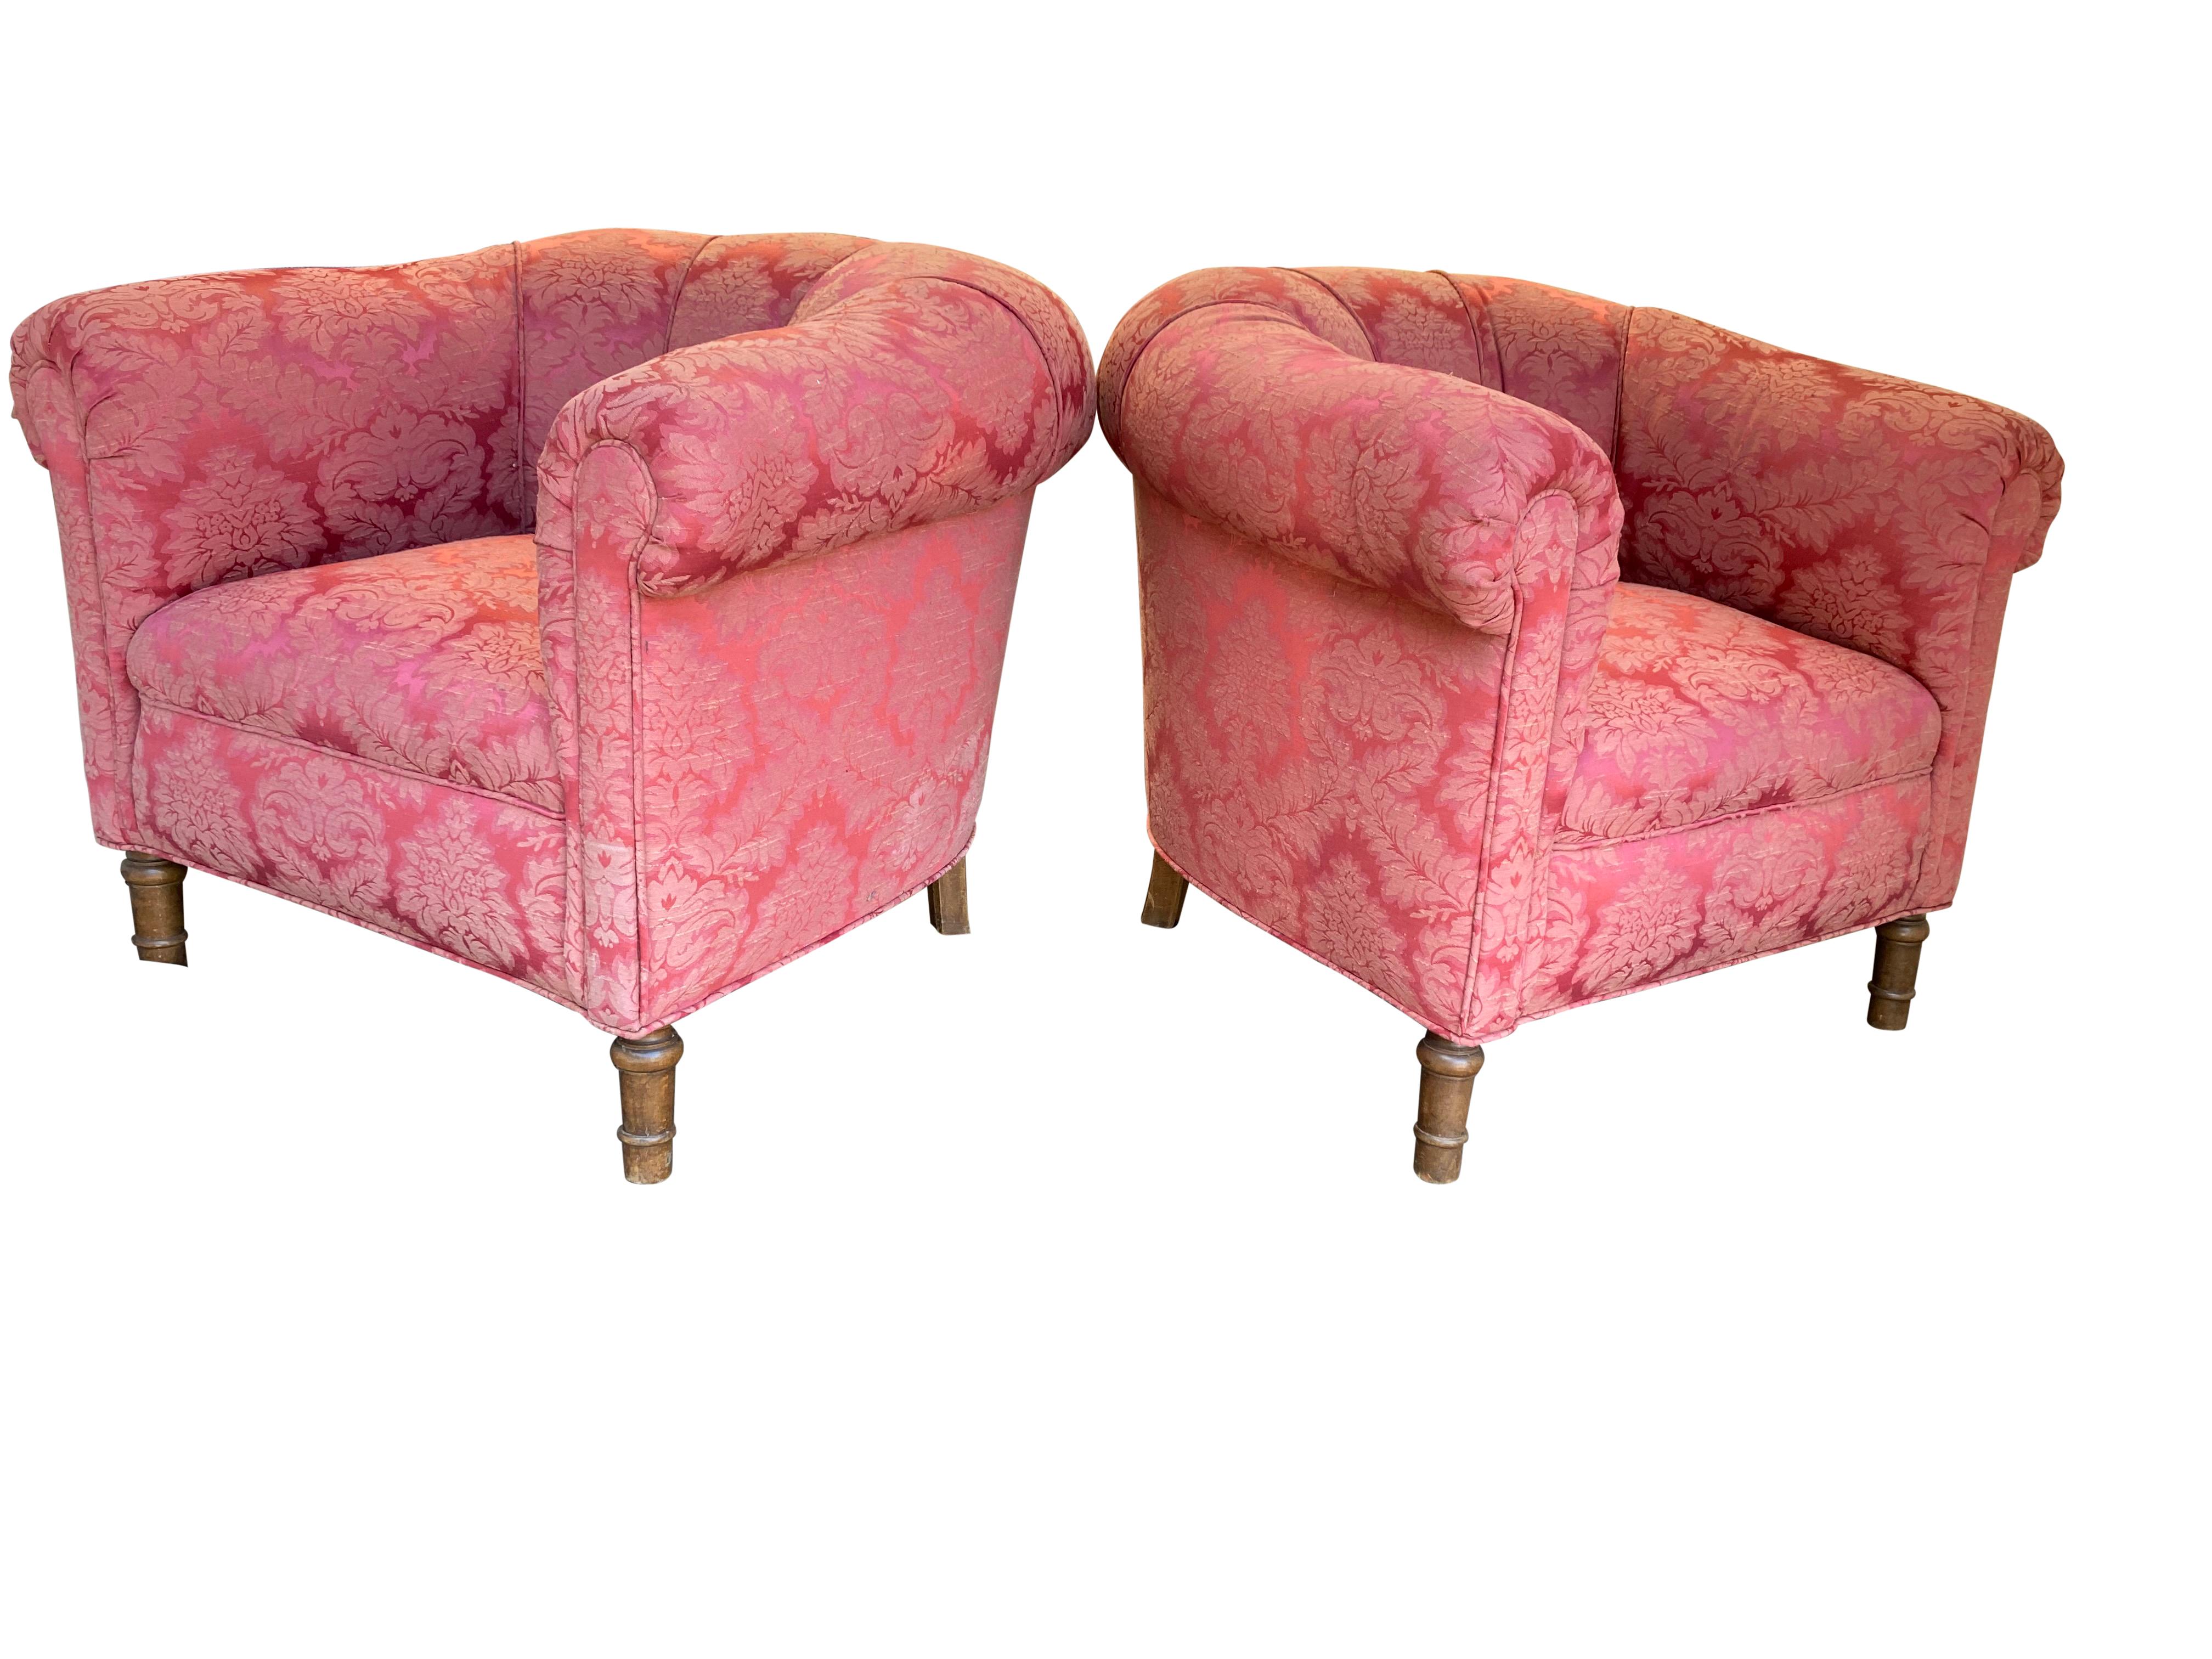 Pair of 1920s Club Chairs in Damask Floral Design For Sale 5